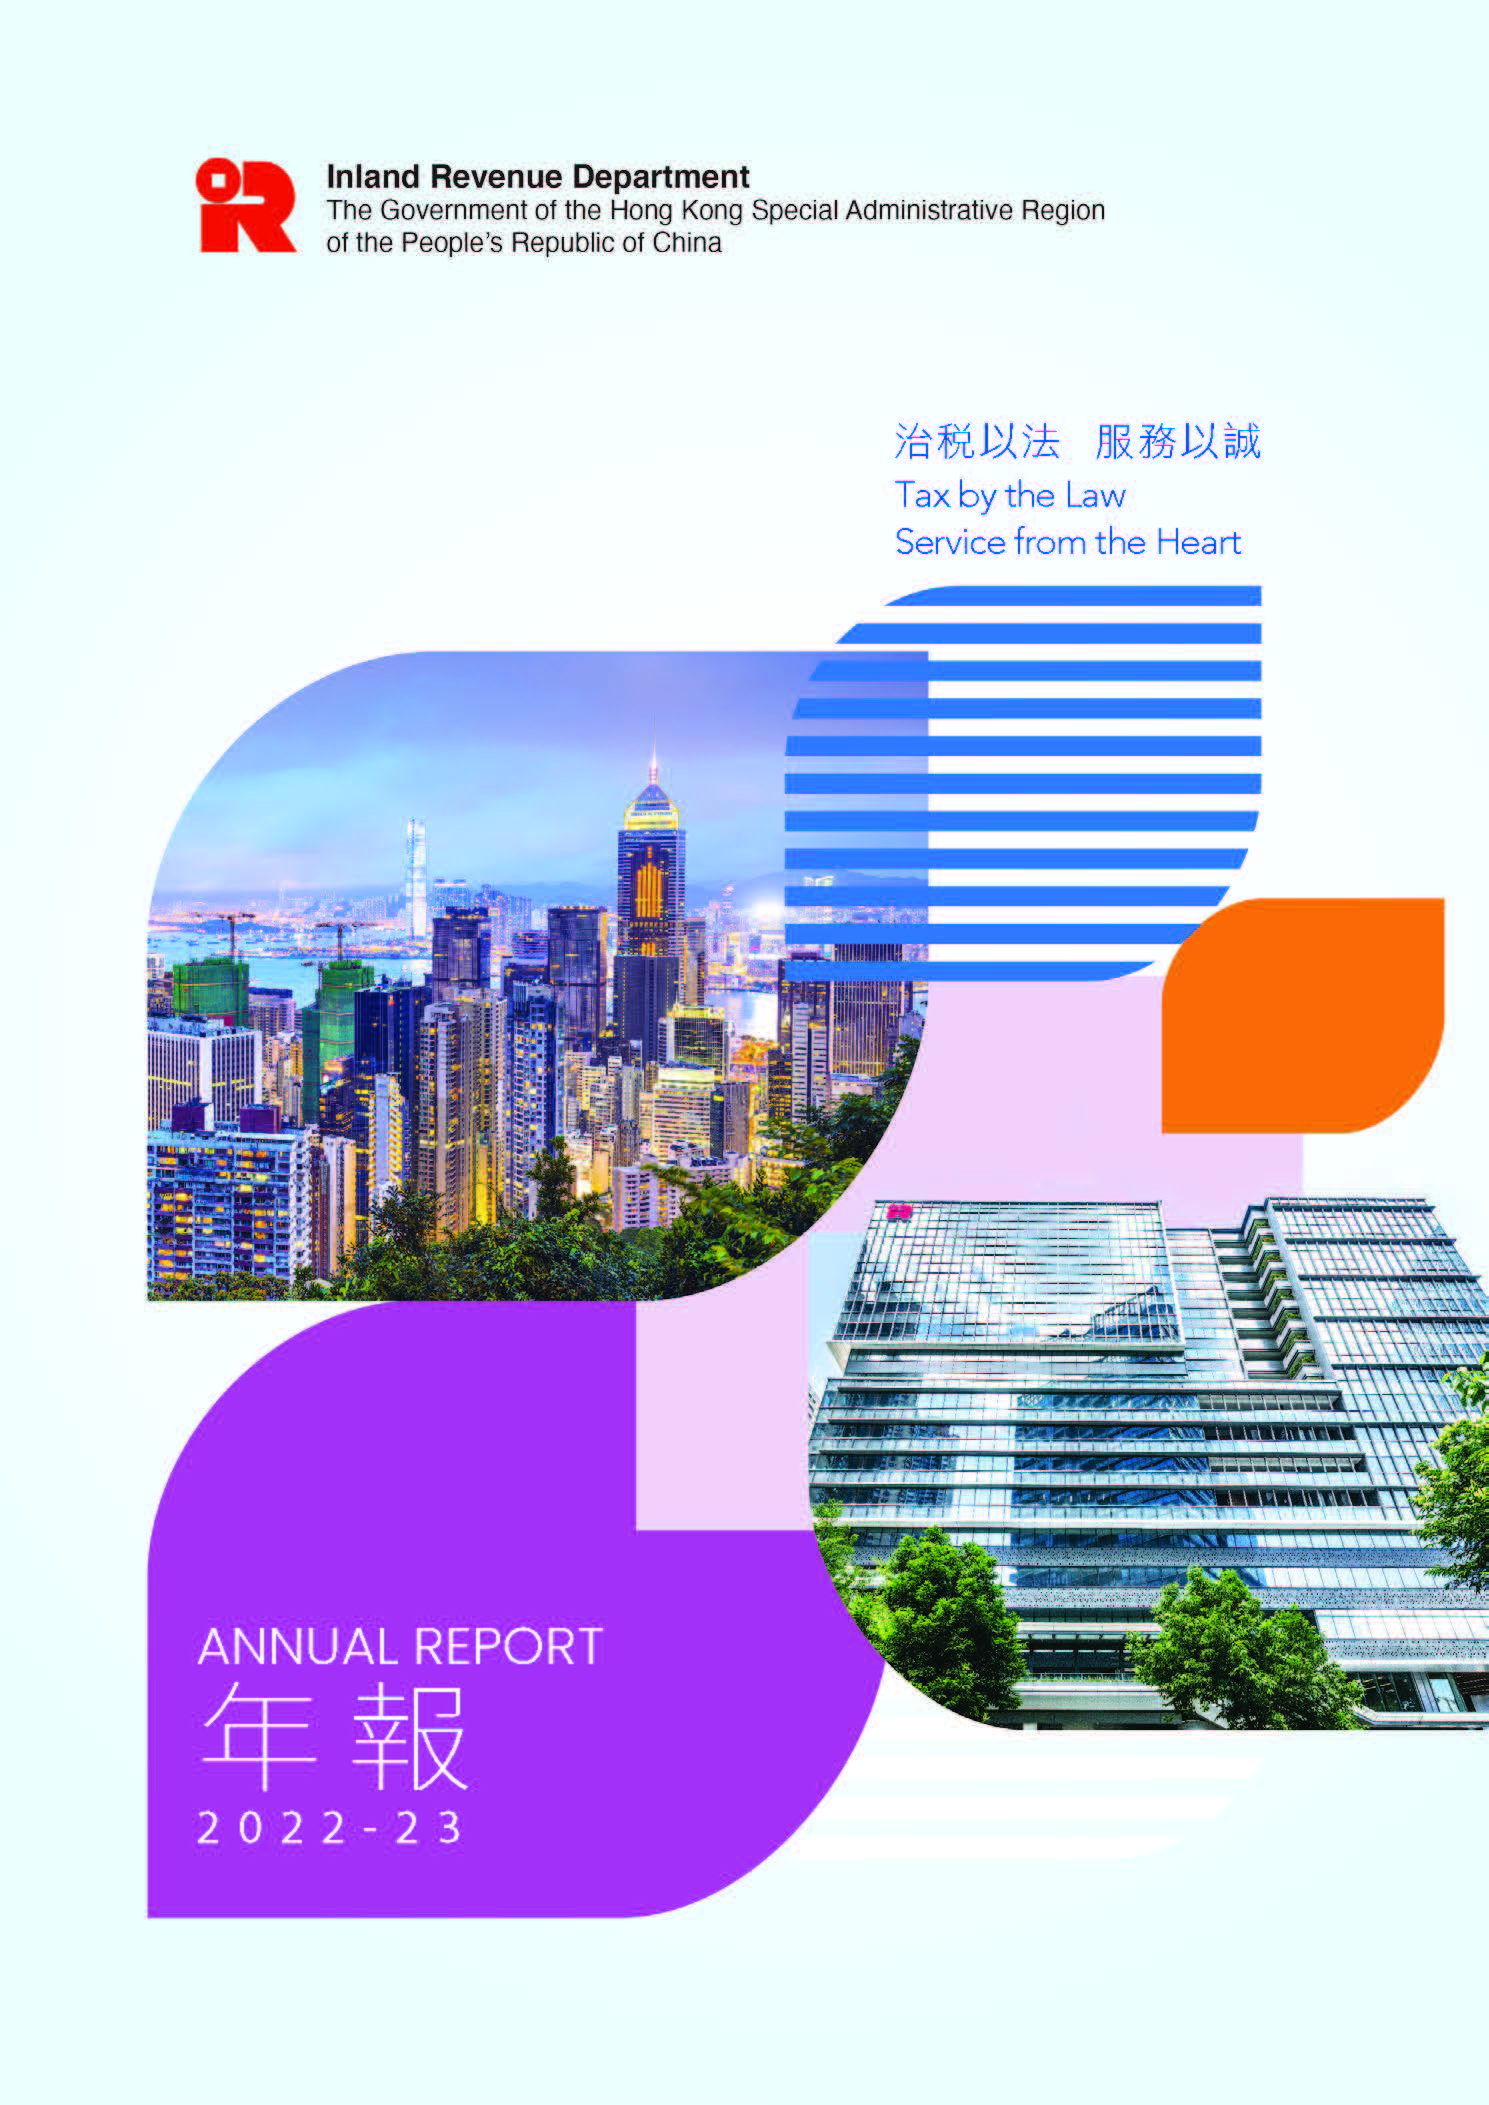 The cover of 2022-23 Annual Report